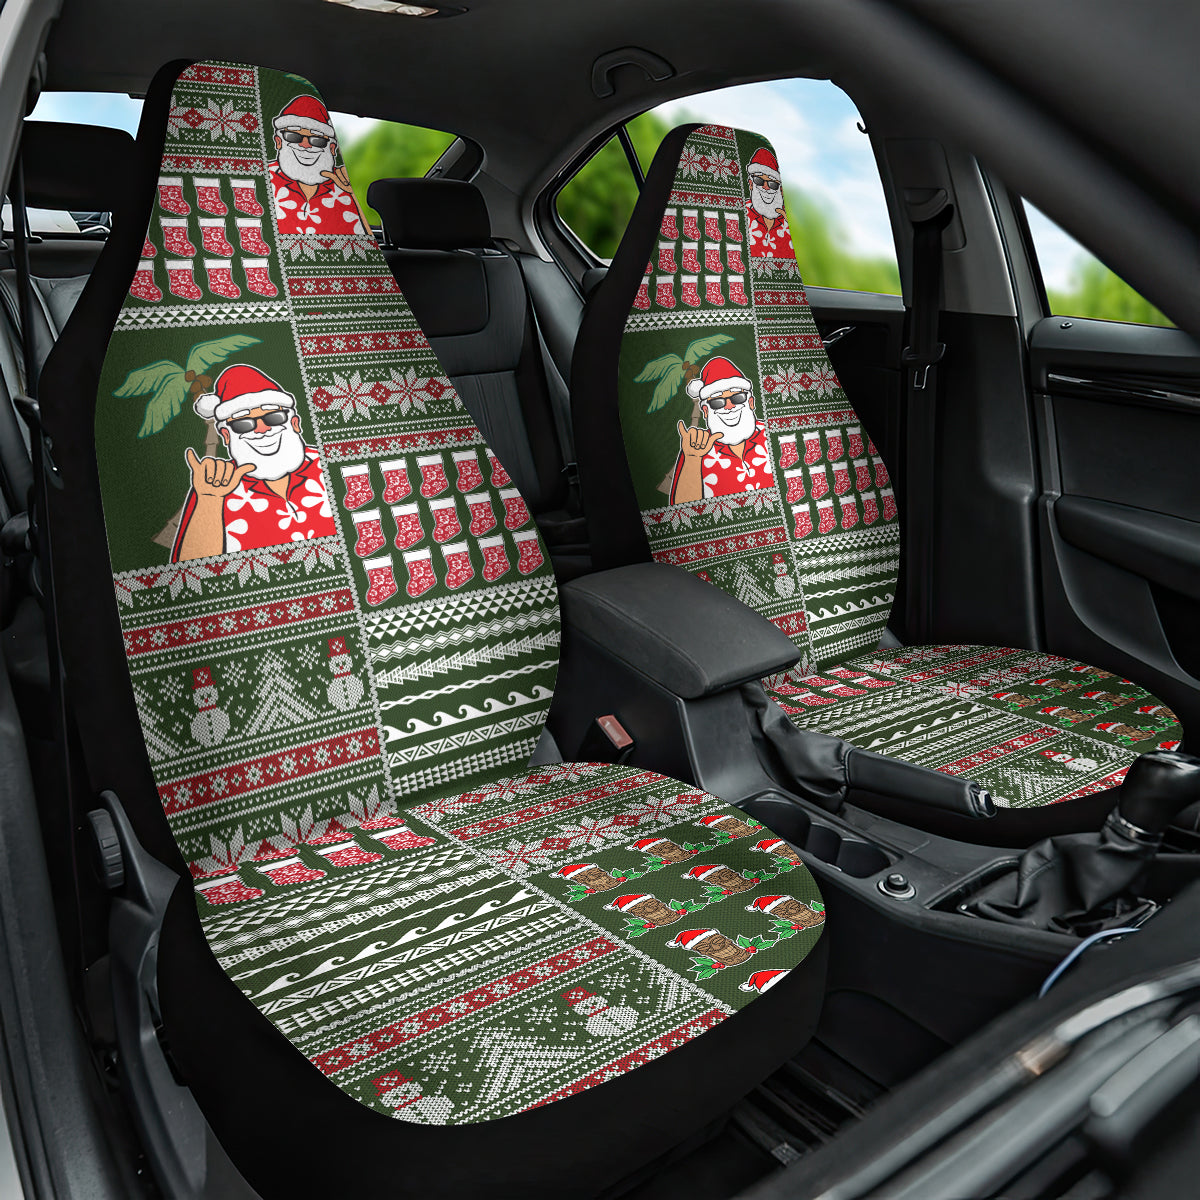 Hawaii Mele Kalikimaka Car Seat Cover Aloha and Christmas Elements Patchwork Green Style LT03 One Size Green - Polynesian Pride